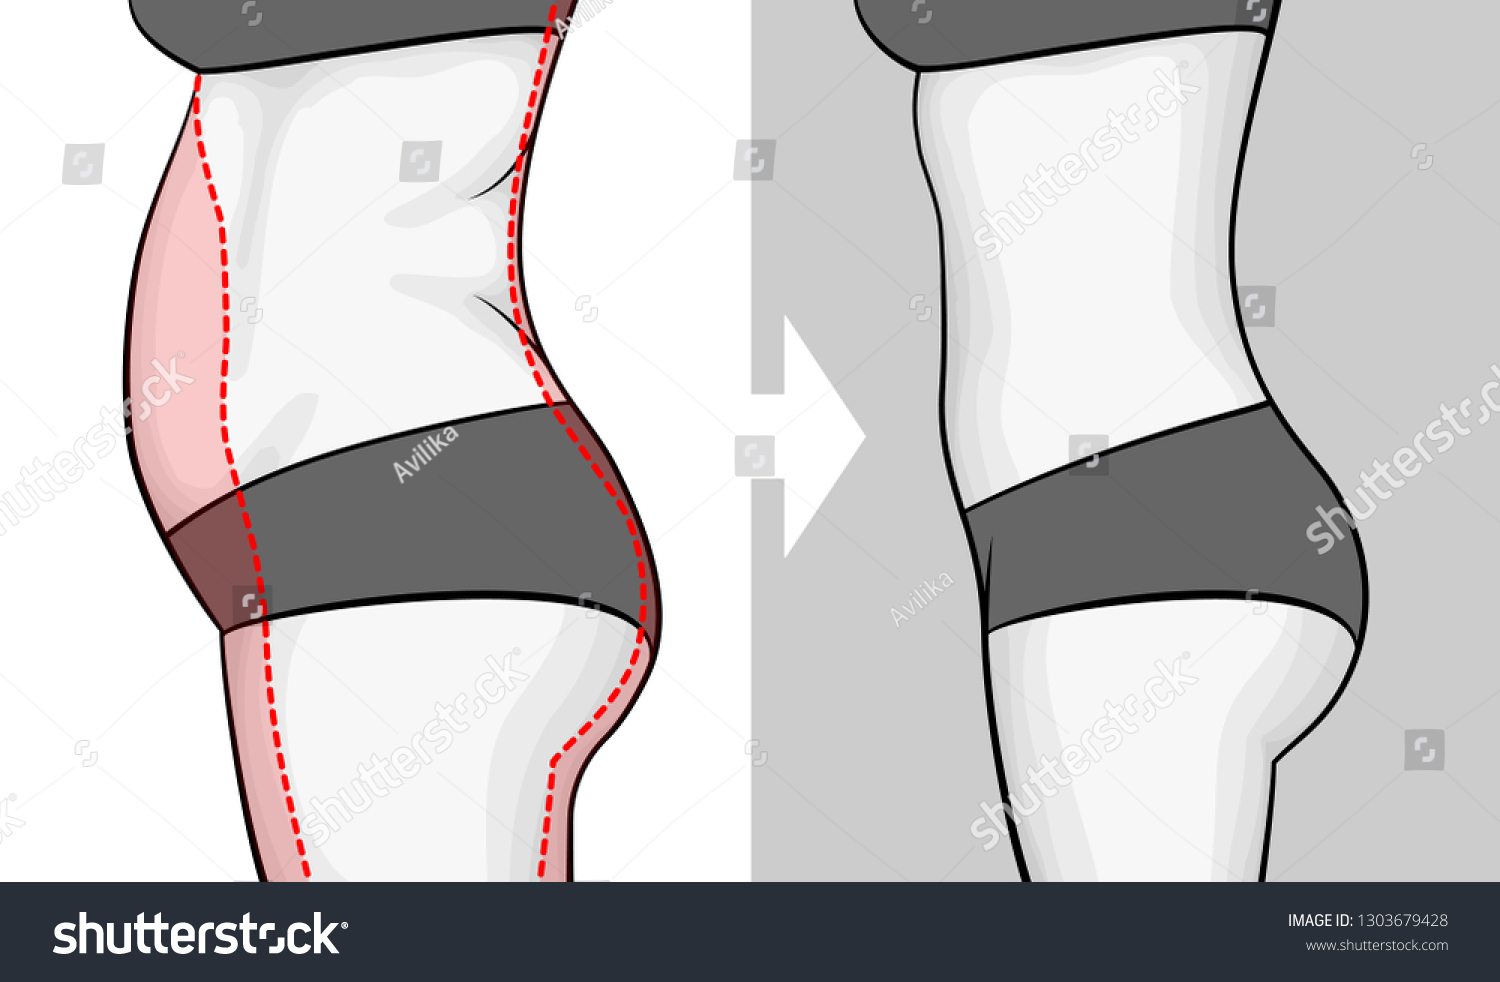 SVG of The body of a woman before and after losing weight. Belly view from side. Red outline showing excess weight. svg